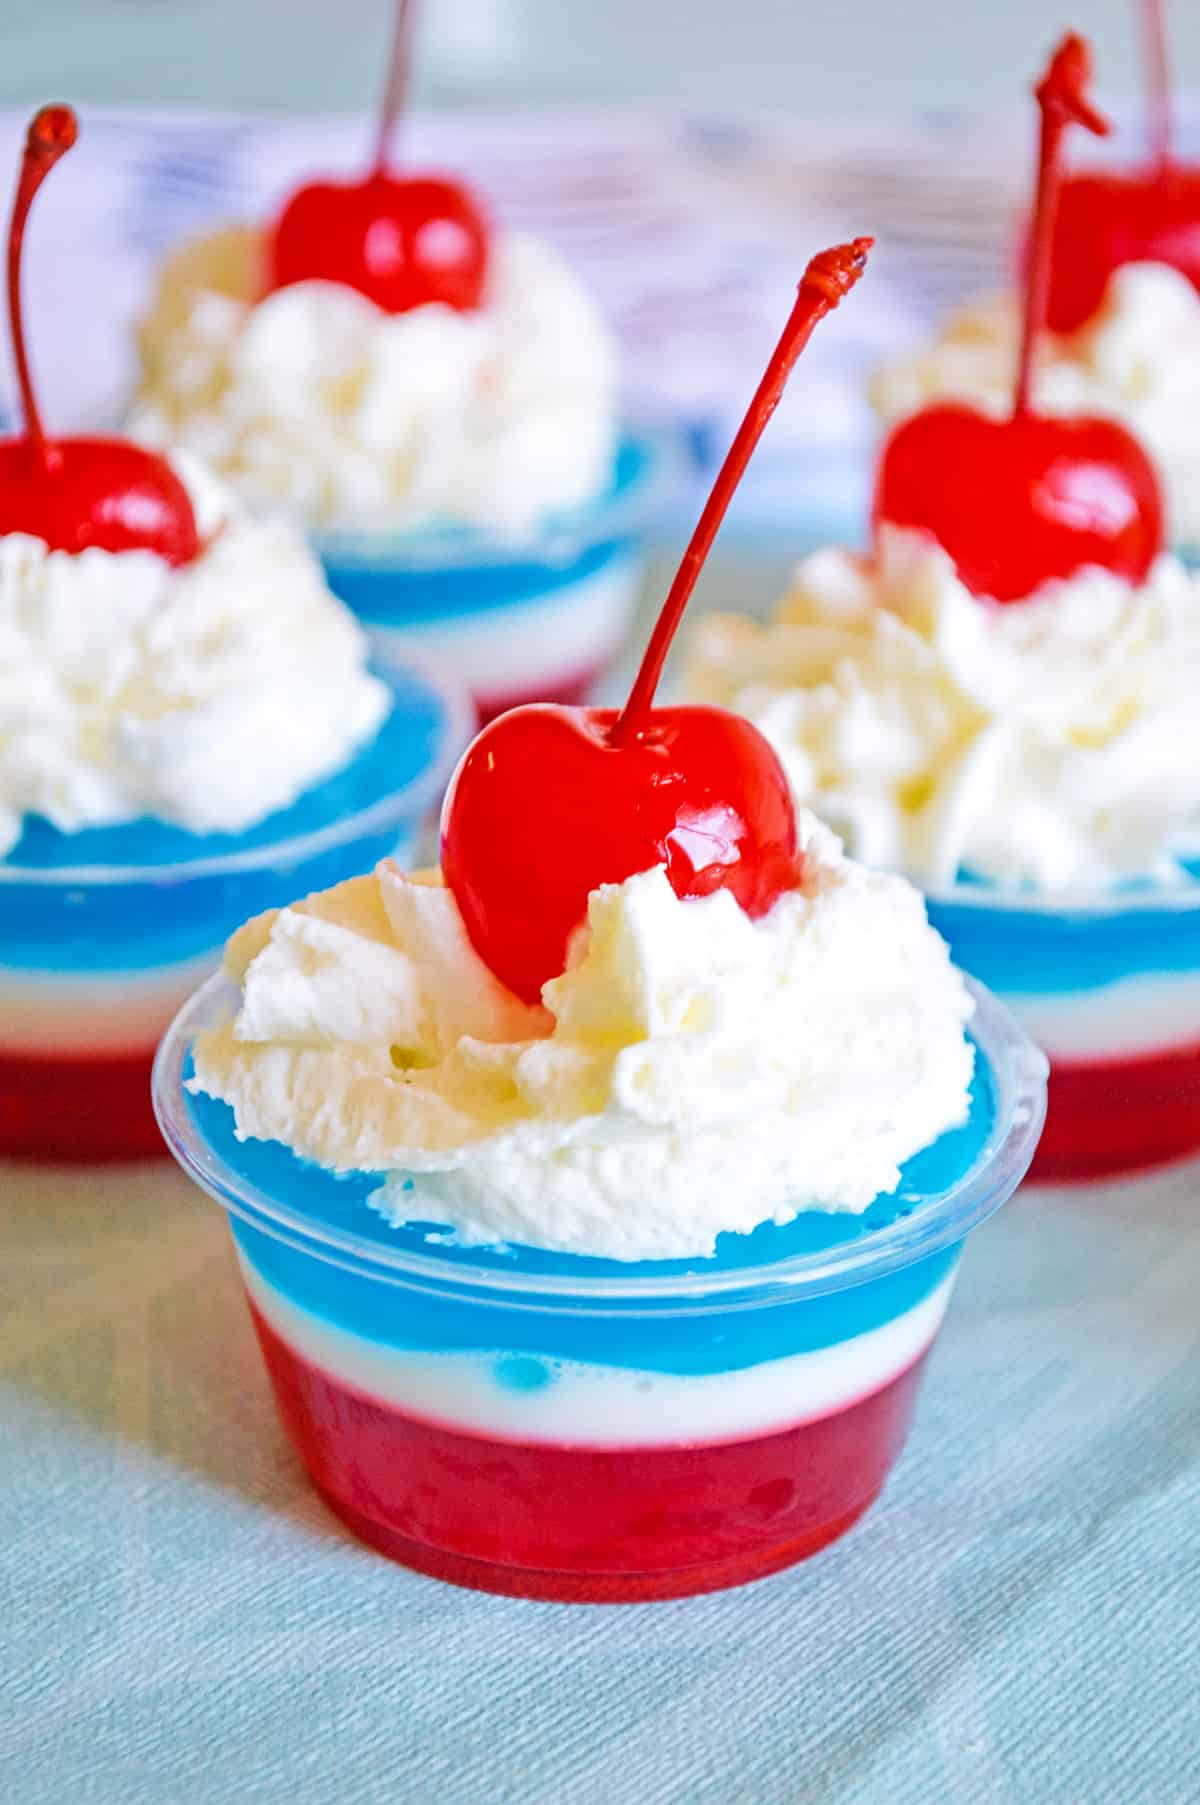 Layers of red, white, and blue gelatin topped with whipped cream and a maraschino cherry in a small clear plastic cup